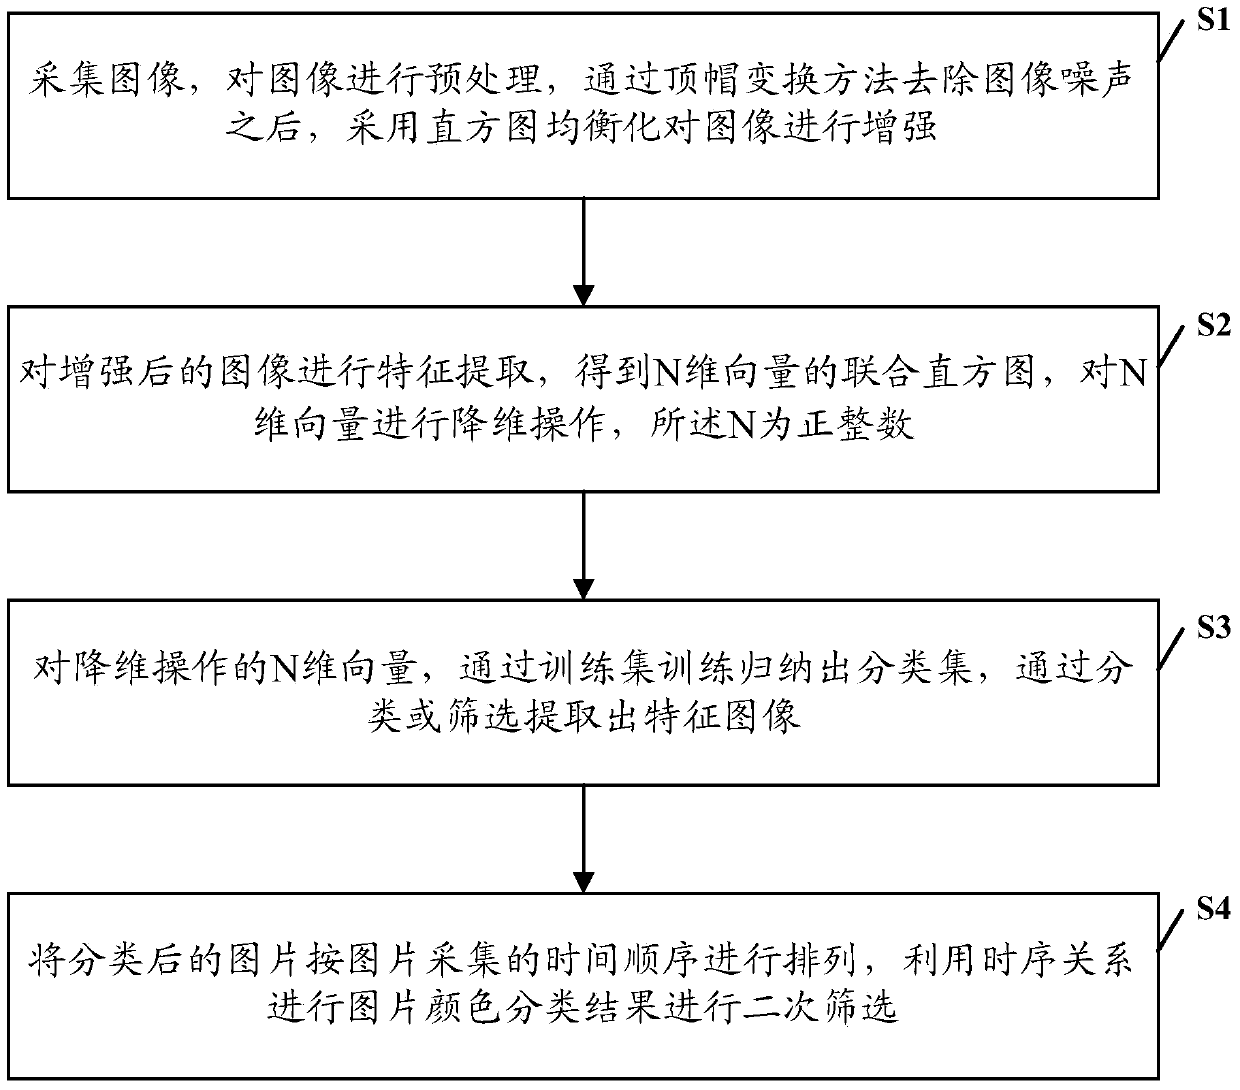 Image Classification Recognition Judgment Method